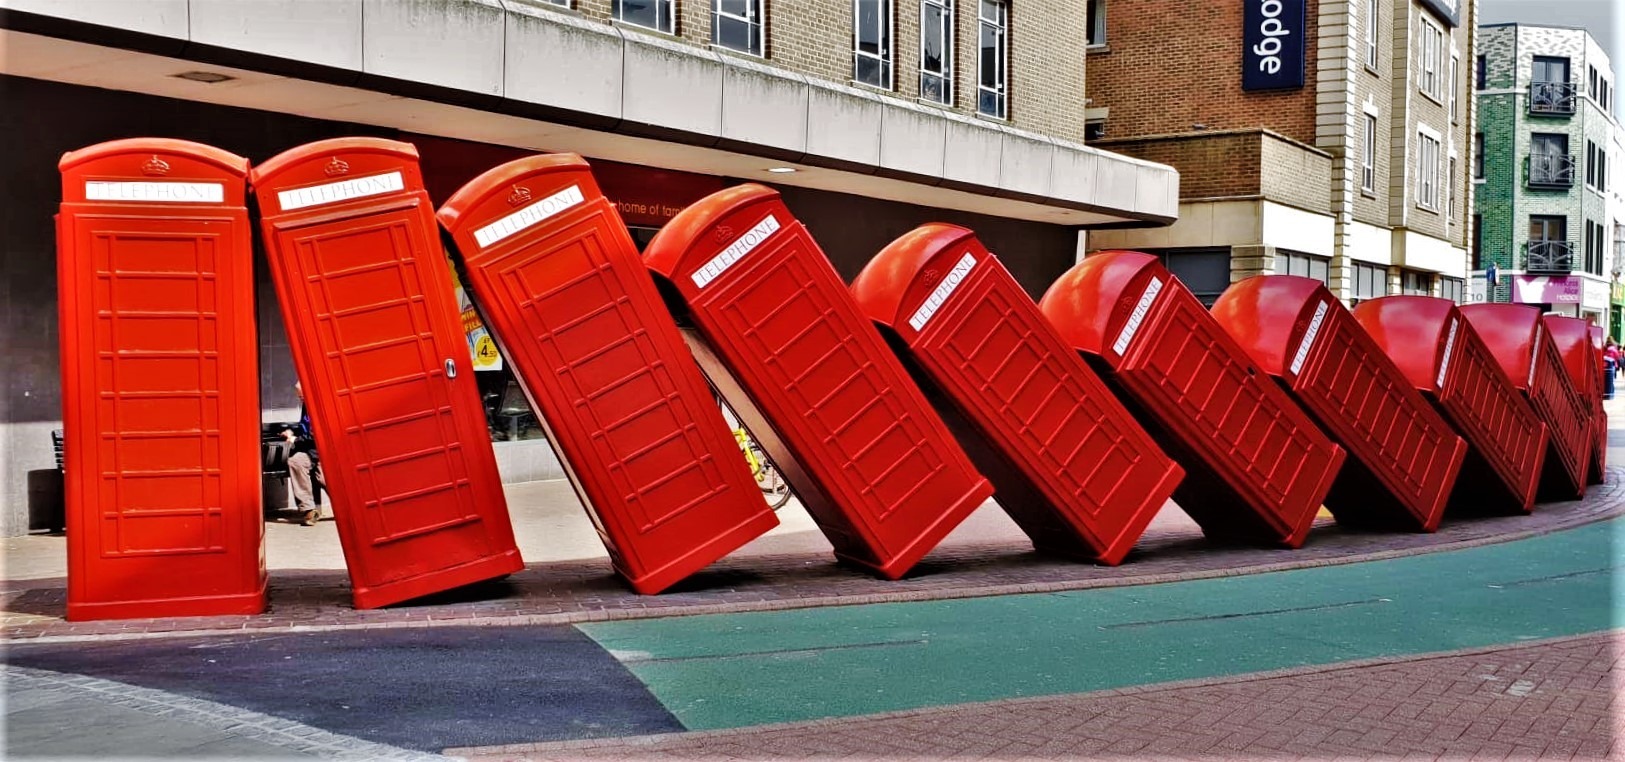 “Out of Order” telephone box artwork refurbished in Kingston